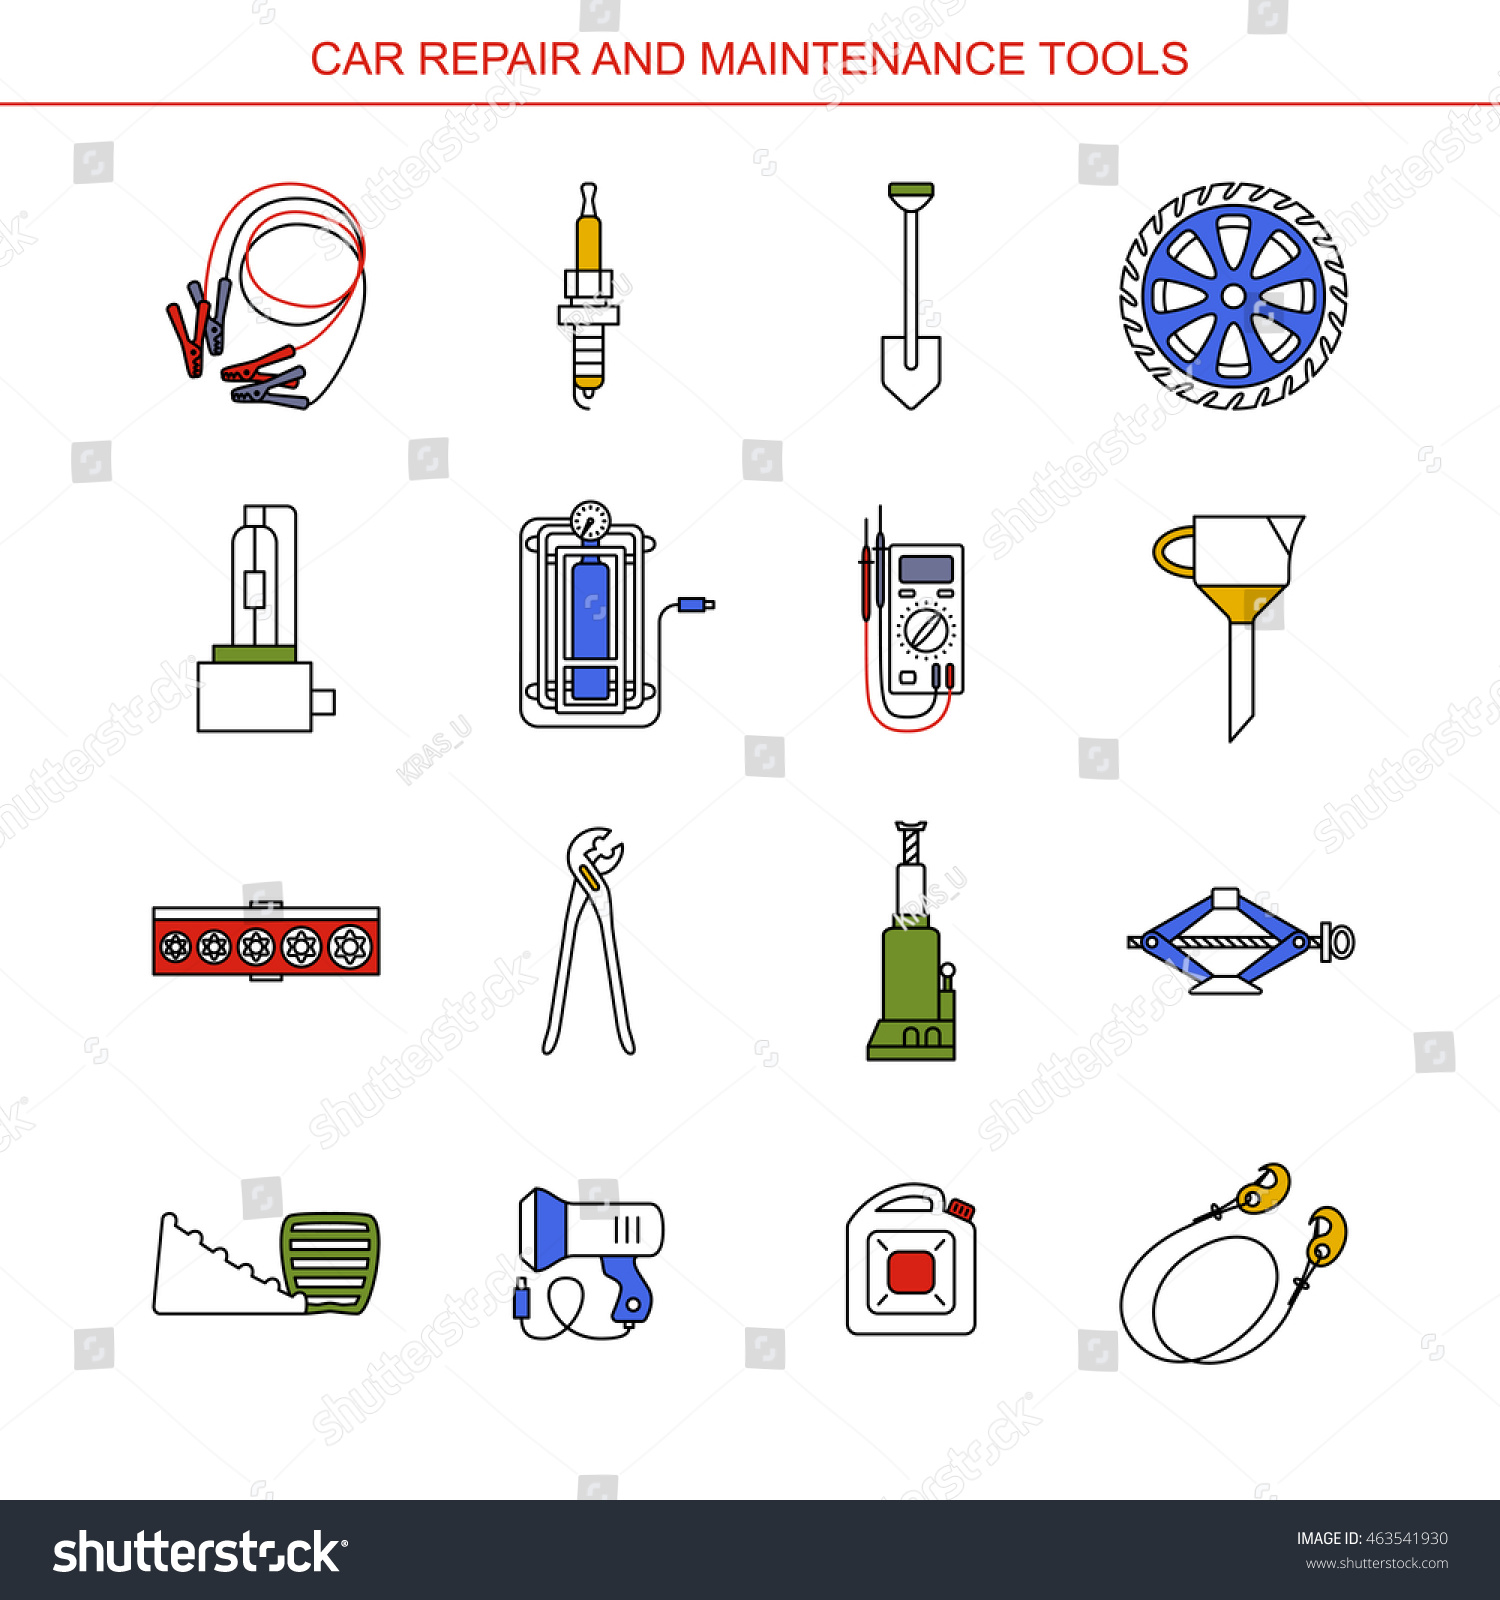 SVG of Car Repair and Maintenance Tools. Flat line icons set. Auto mechanic tools. Isolated background. svg